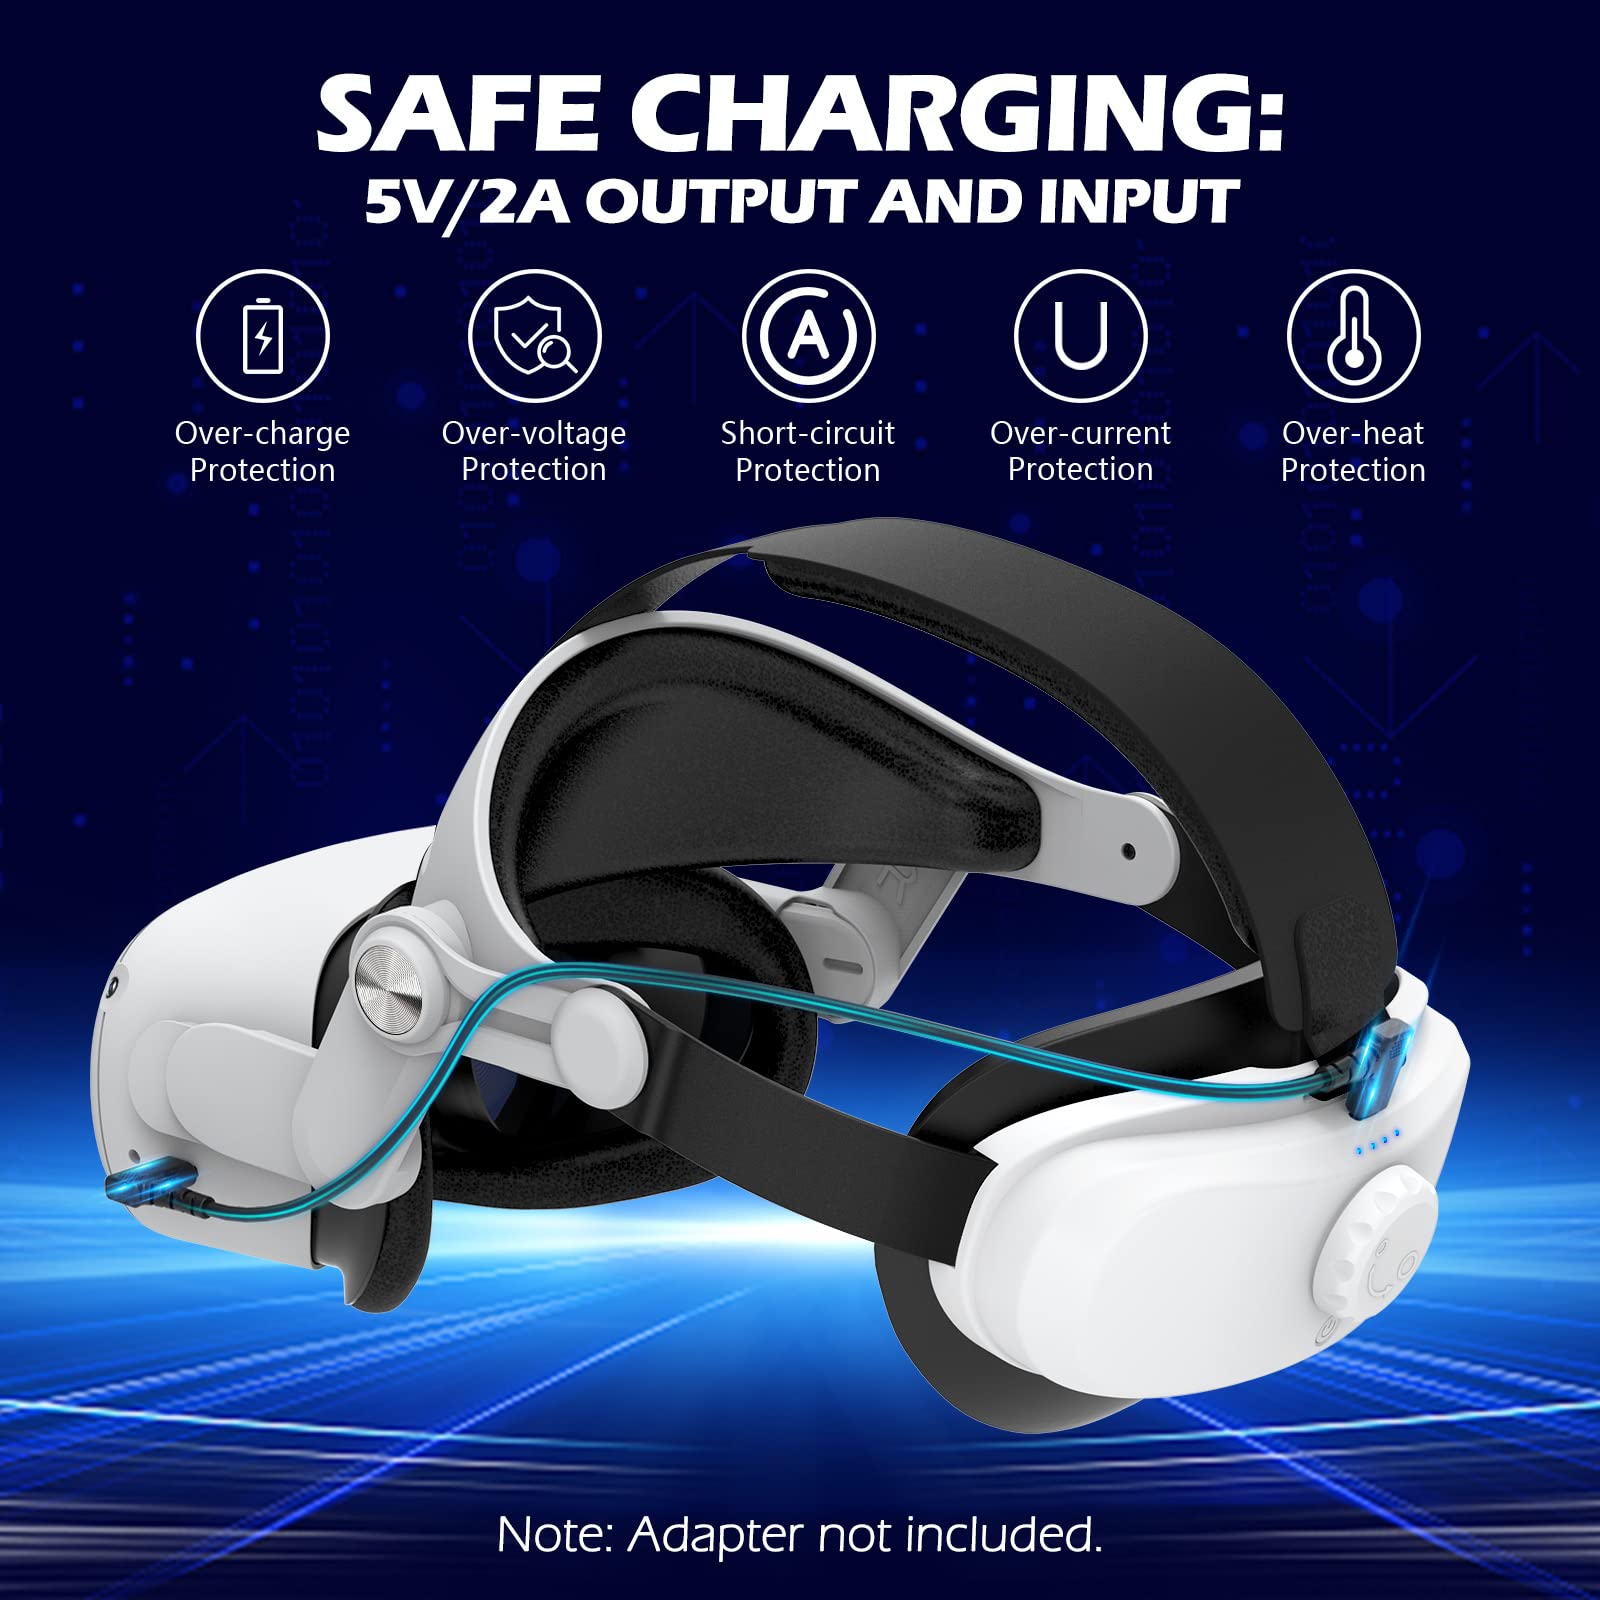 Battery Head Strap for Quest 2 - YOGES 5000mAh Rechargable Adjustable Headstrap to Extend Playtime and Comfort for VR Headset, Super Soft Foam and Skin-Friendly PU Quest 2 Accessories, White